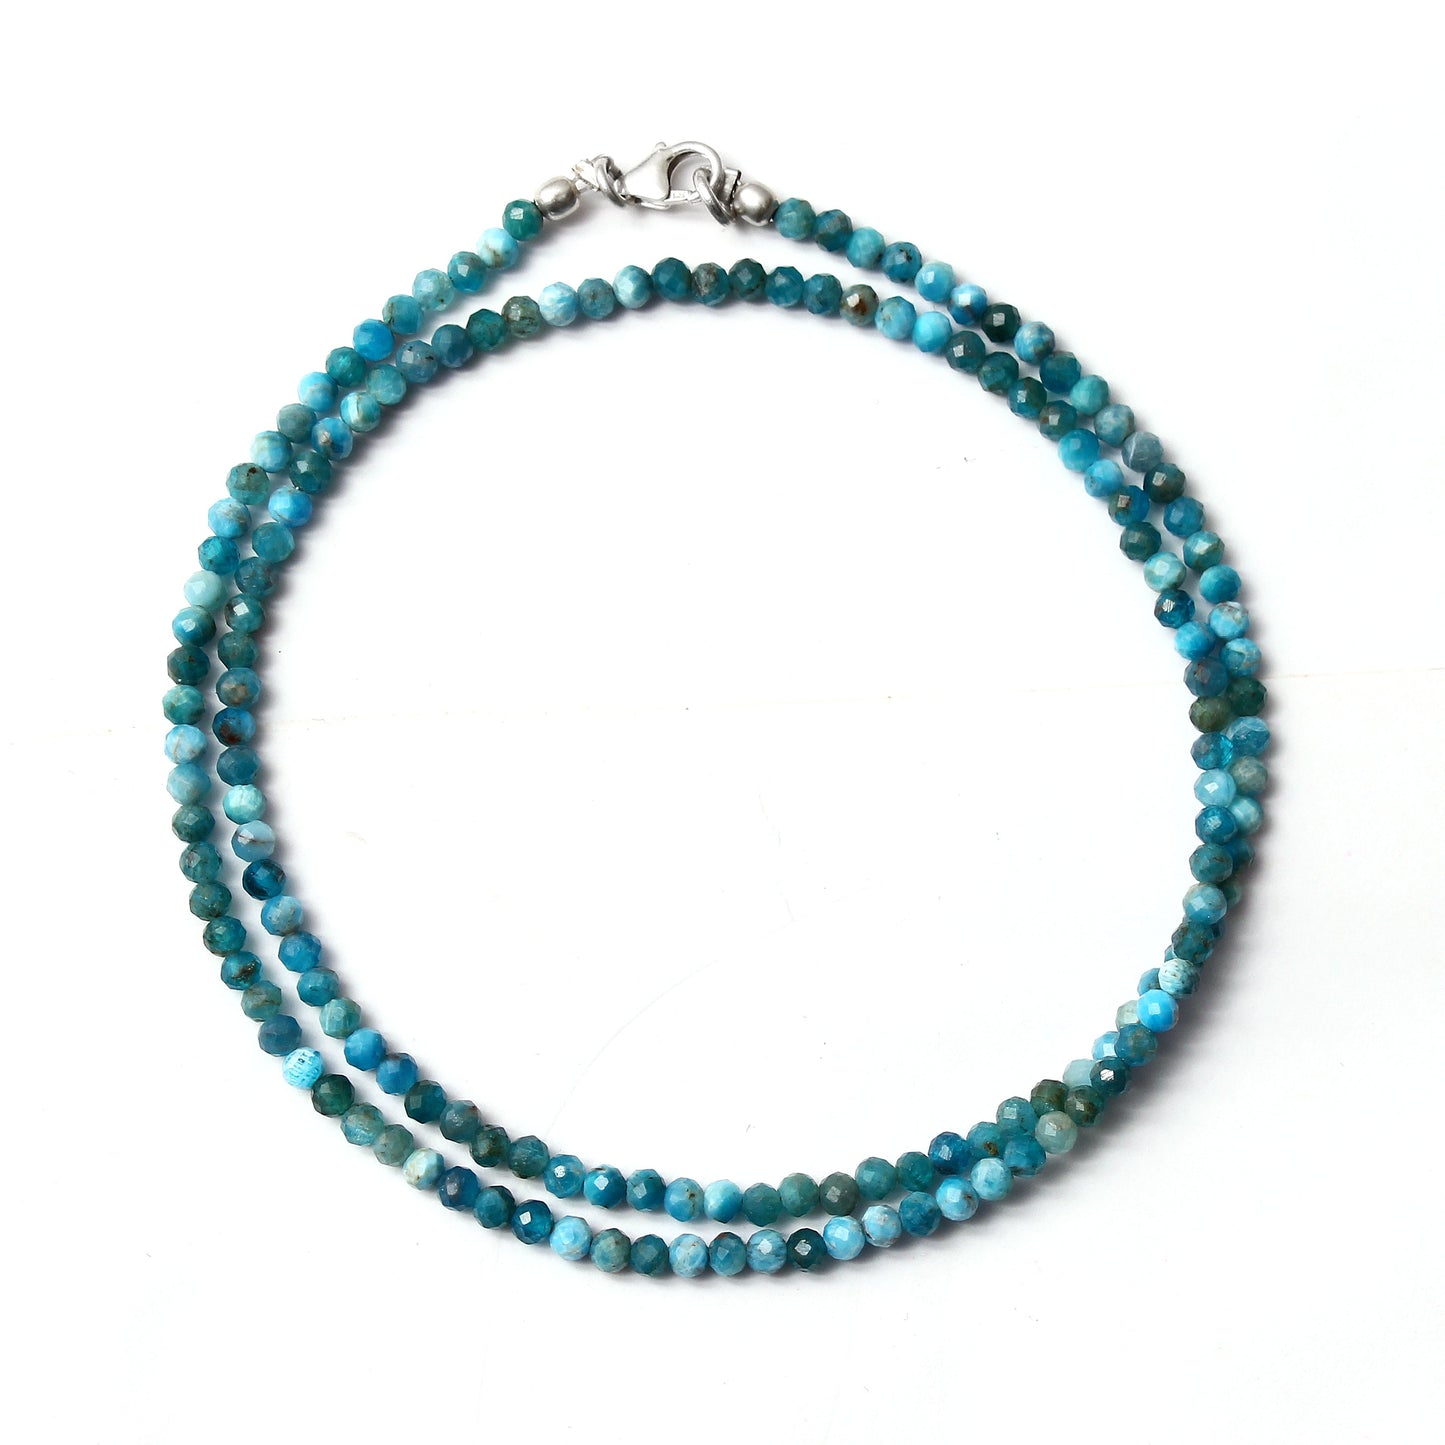 Neon Blue Apatite Beaded Necklace, Faceted Round Apatite Beads Necklace, Apatite Jewelry Necklace, GemsRush